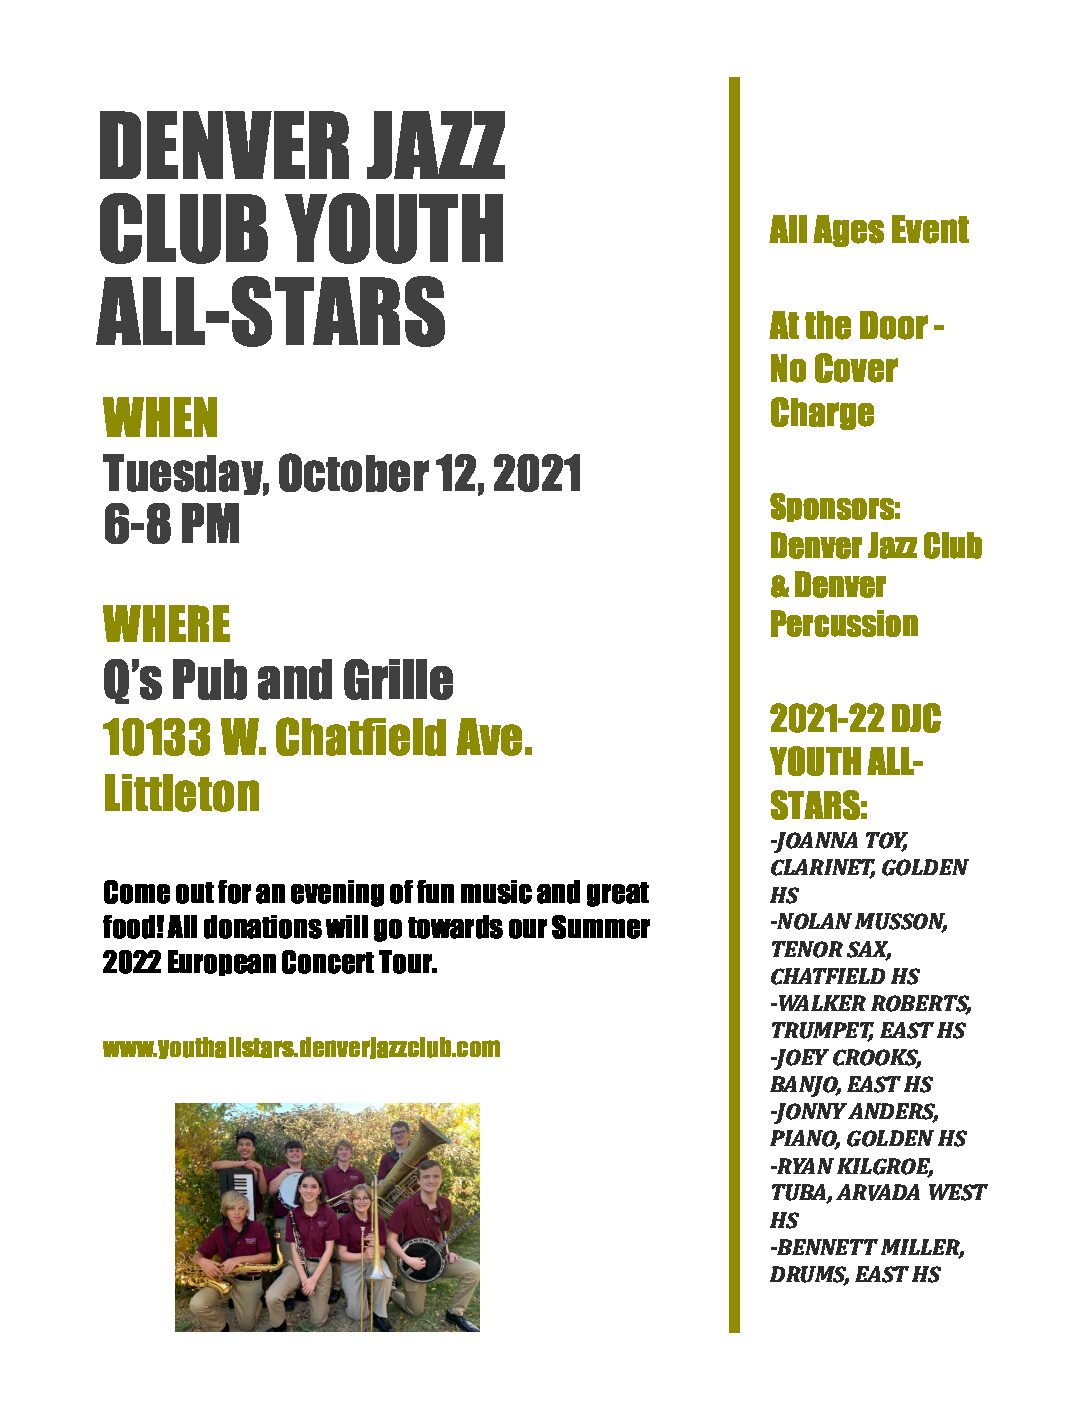 Q’s Pub and Grille to Feature the Denver Jazz Club Youth All-Stars on Tuesday, October 12th